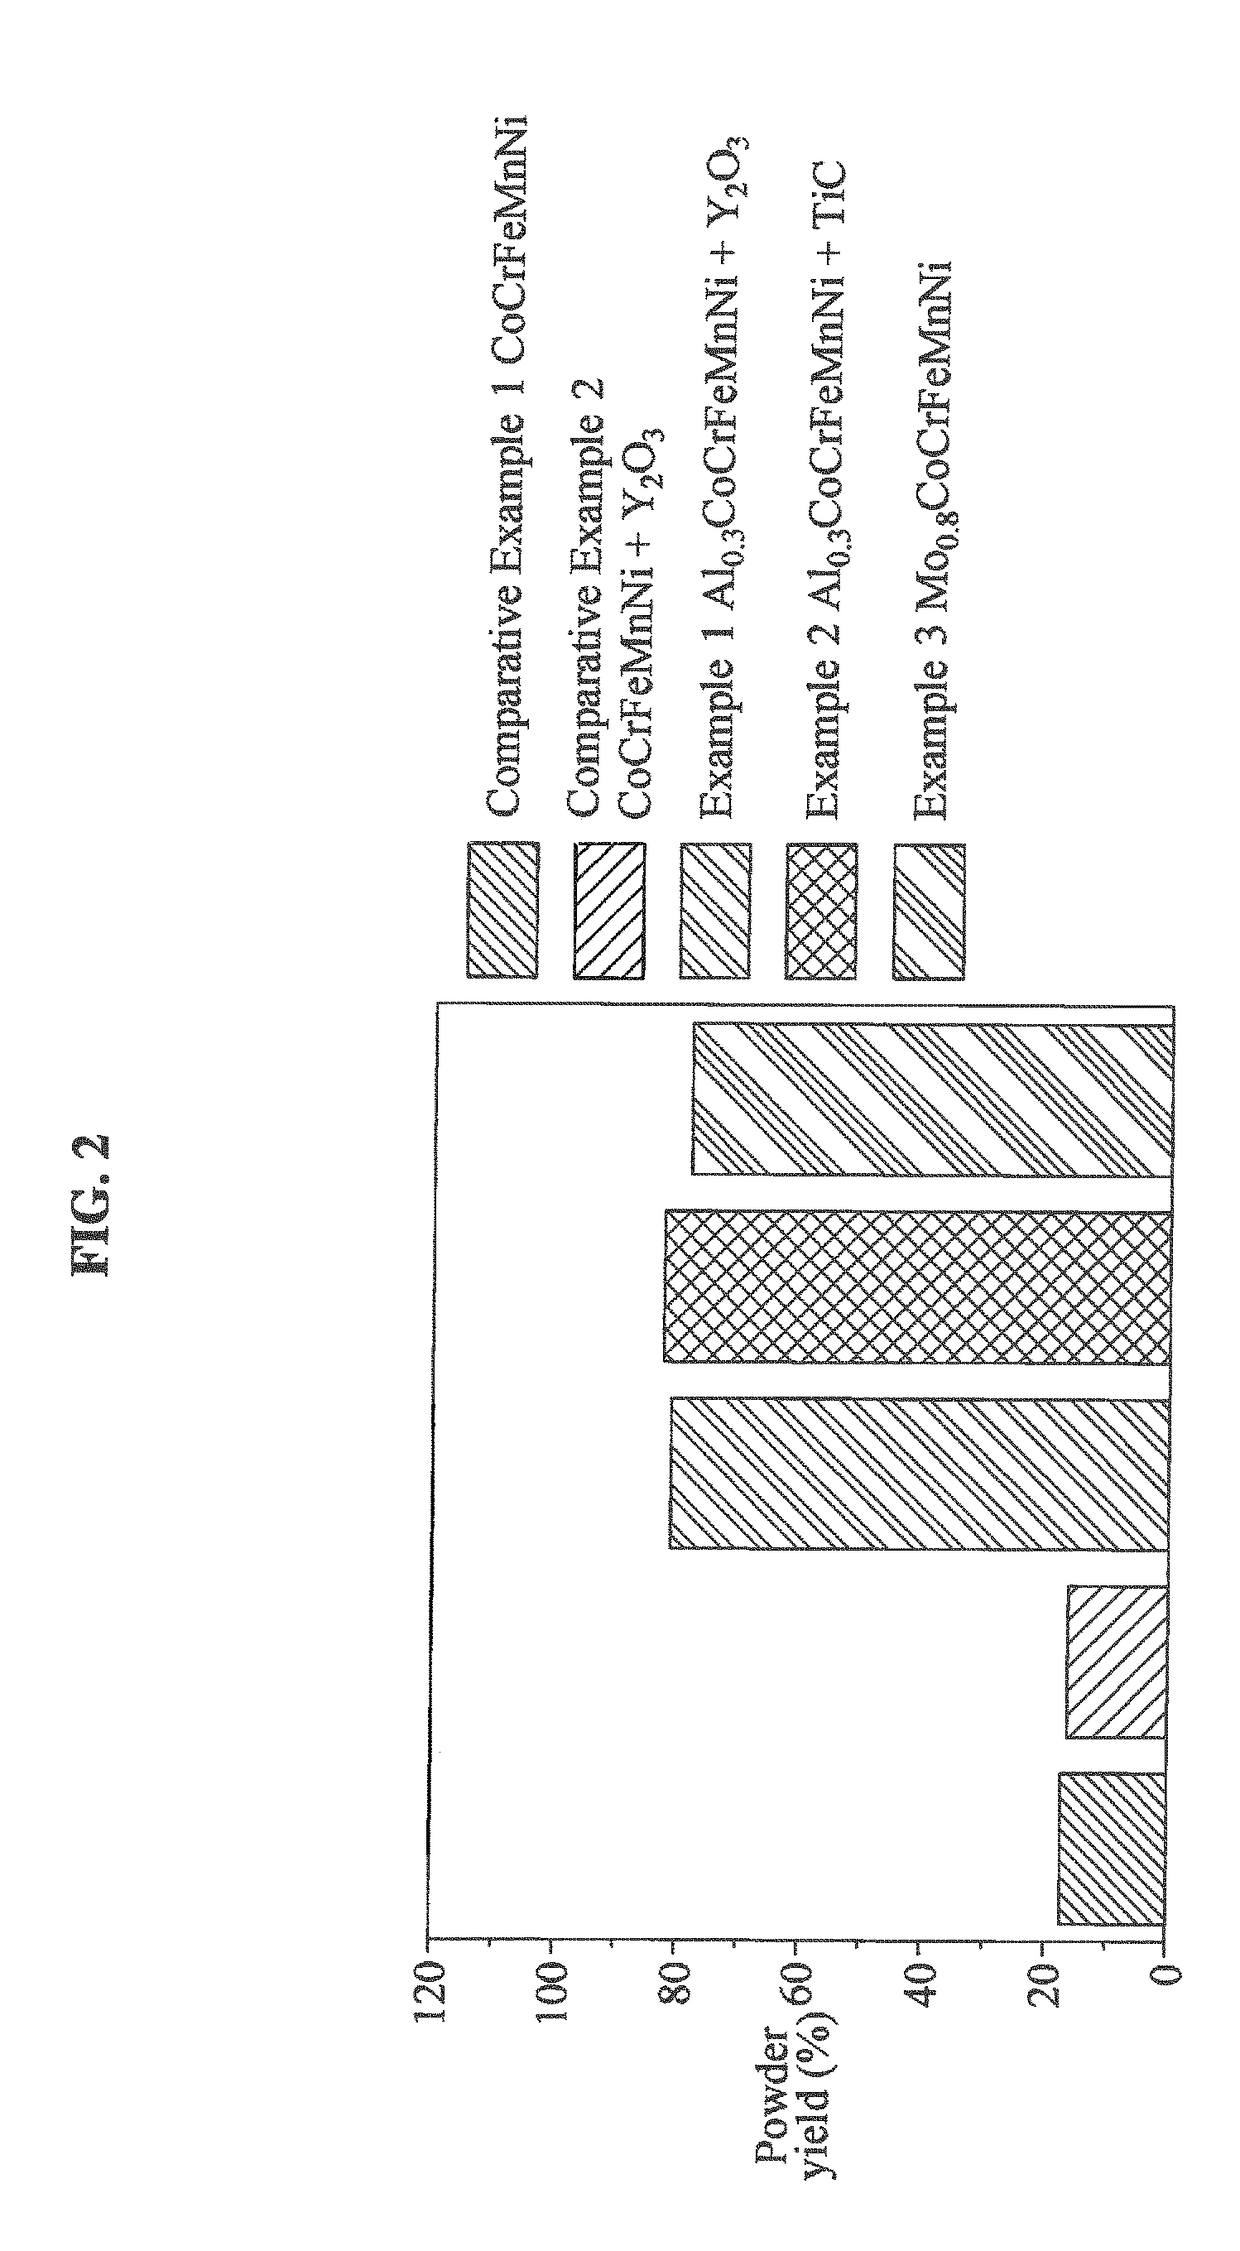 High-strength and ultra heat-resistant high entropy alloy (HEA) matrix composites and method of preparing the same